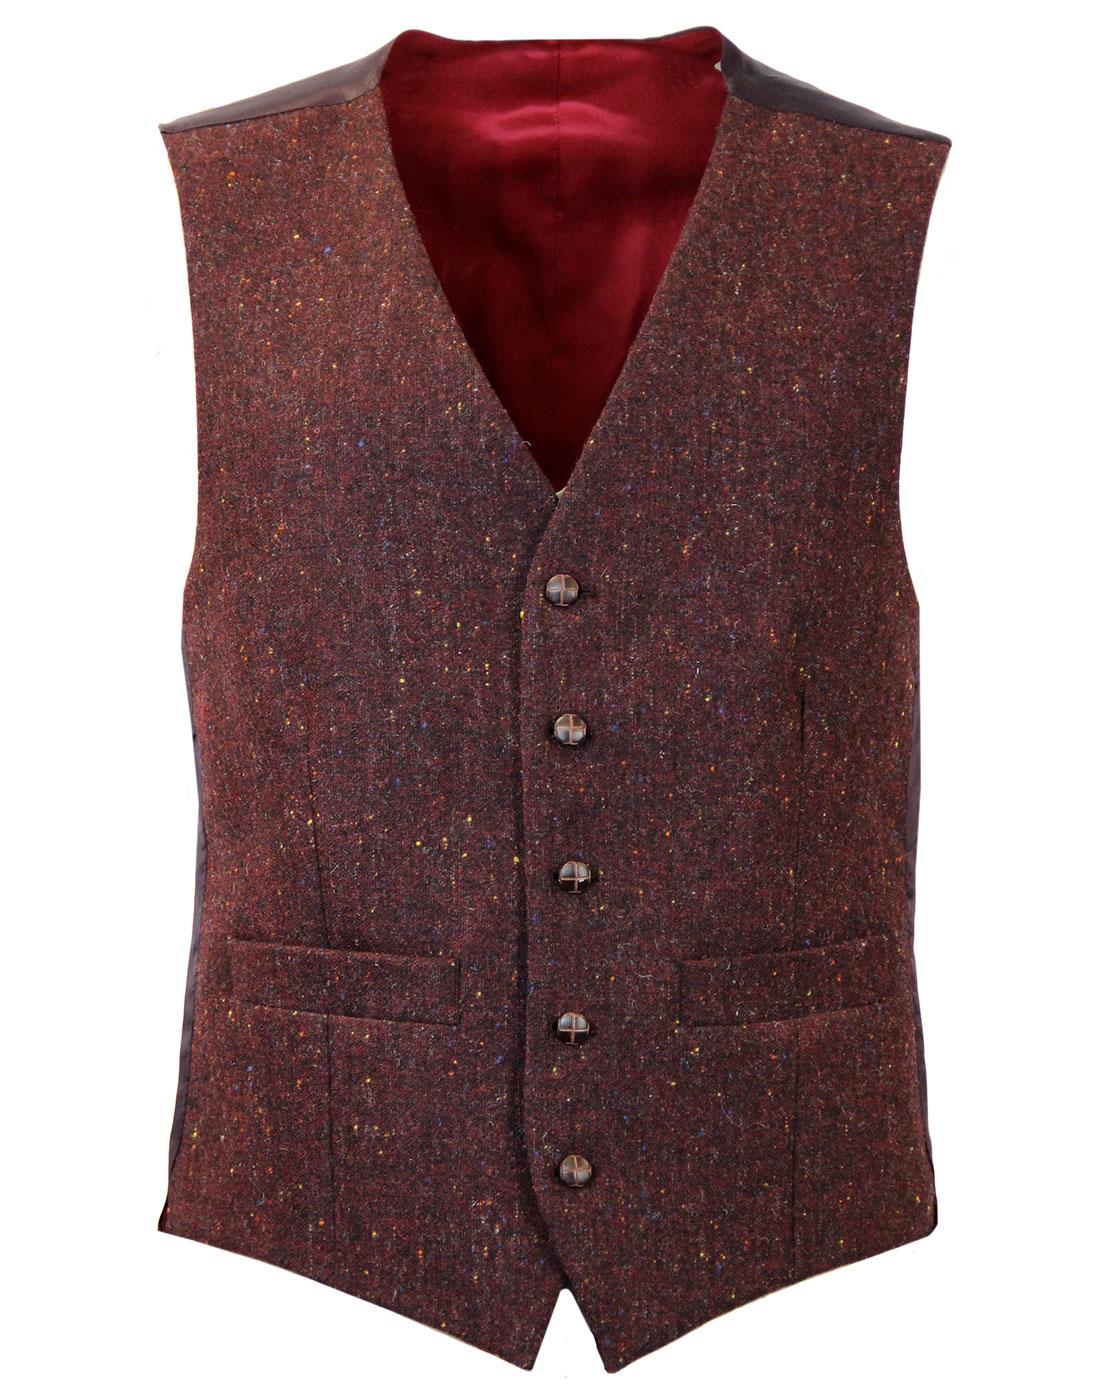 Retro 60s Mod V-Neck Tailored 5 Button Donegal Waistcoat Burgundy